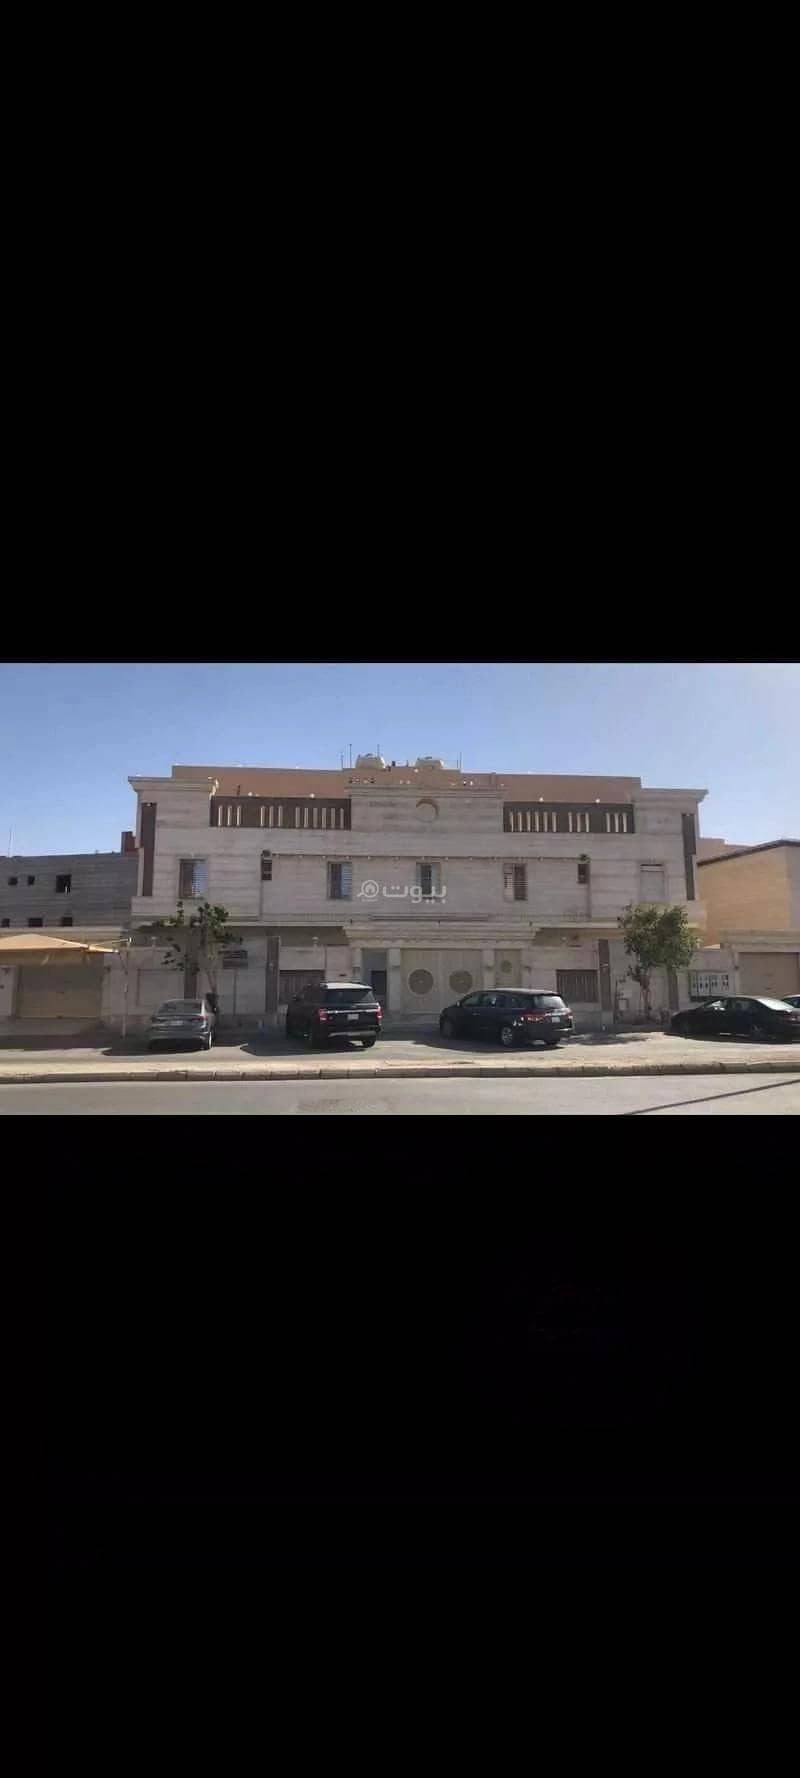 3 Room Apartment For Rent on Arefah Ibn Harith Street, Jeddah